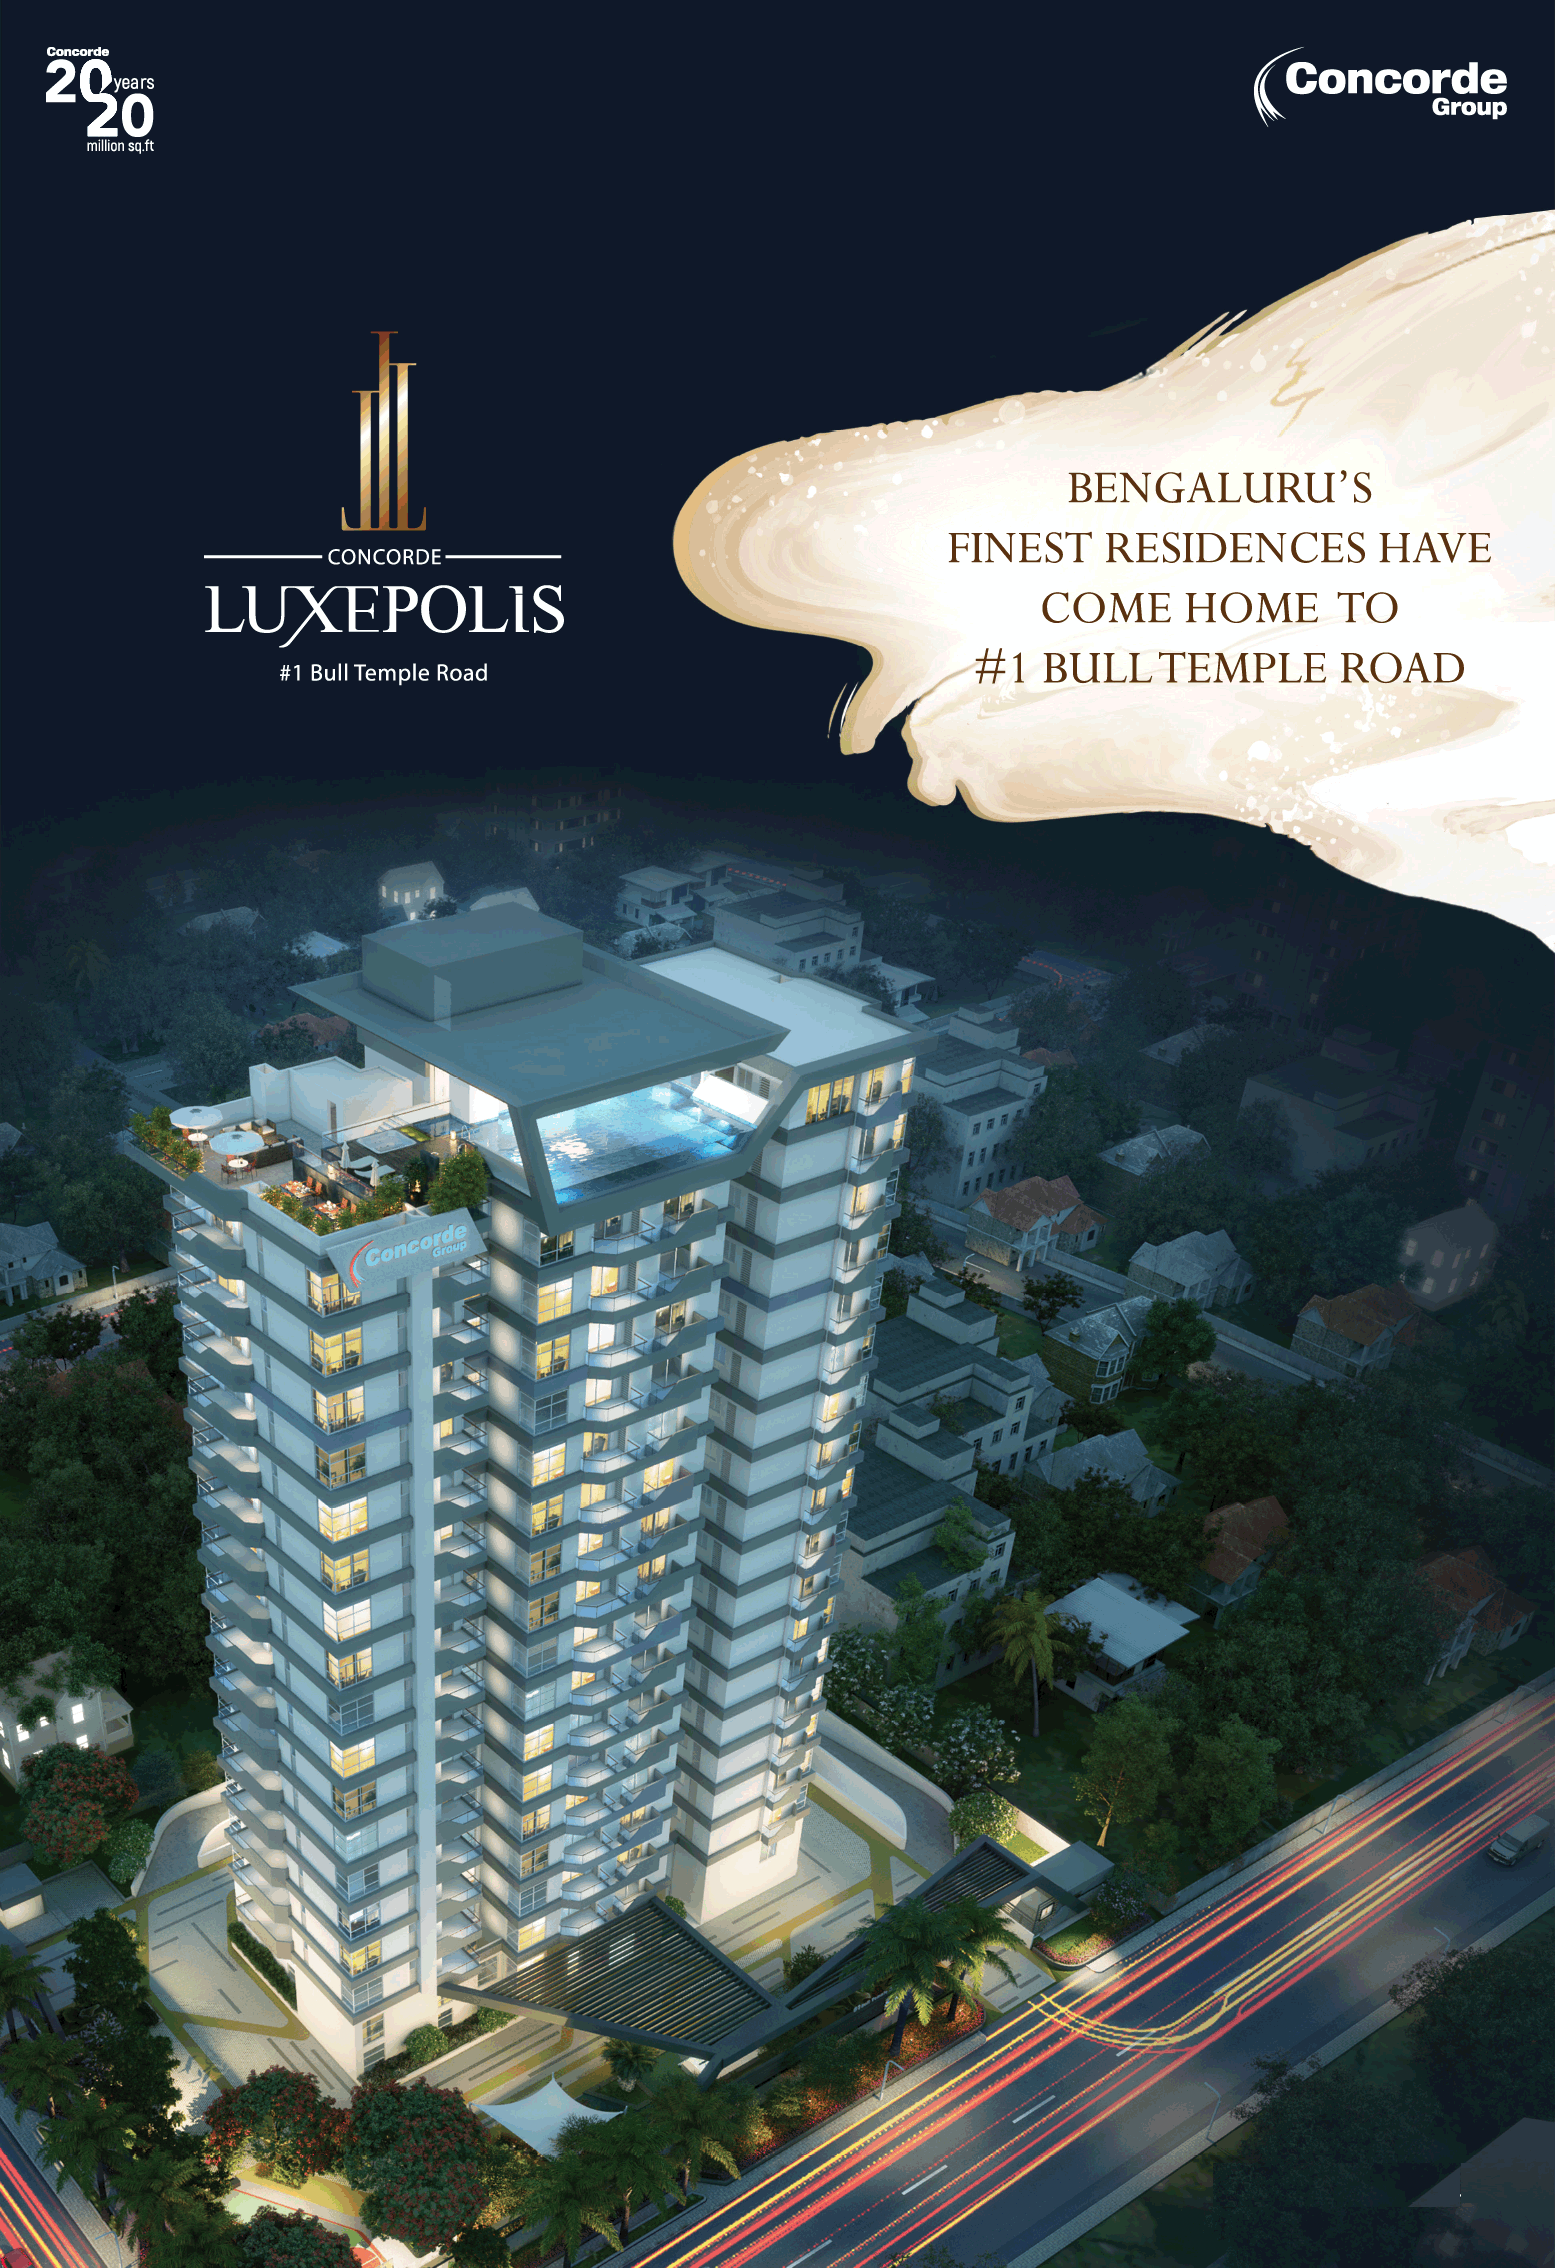 Book finest residences at Concorde Luxepolis in Bangalore Update